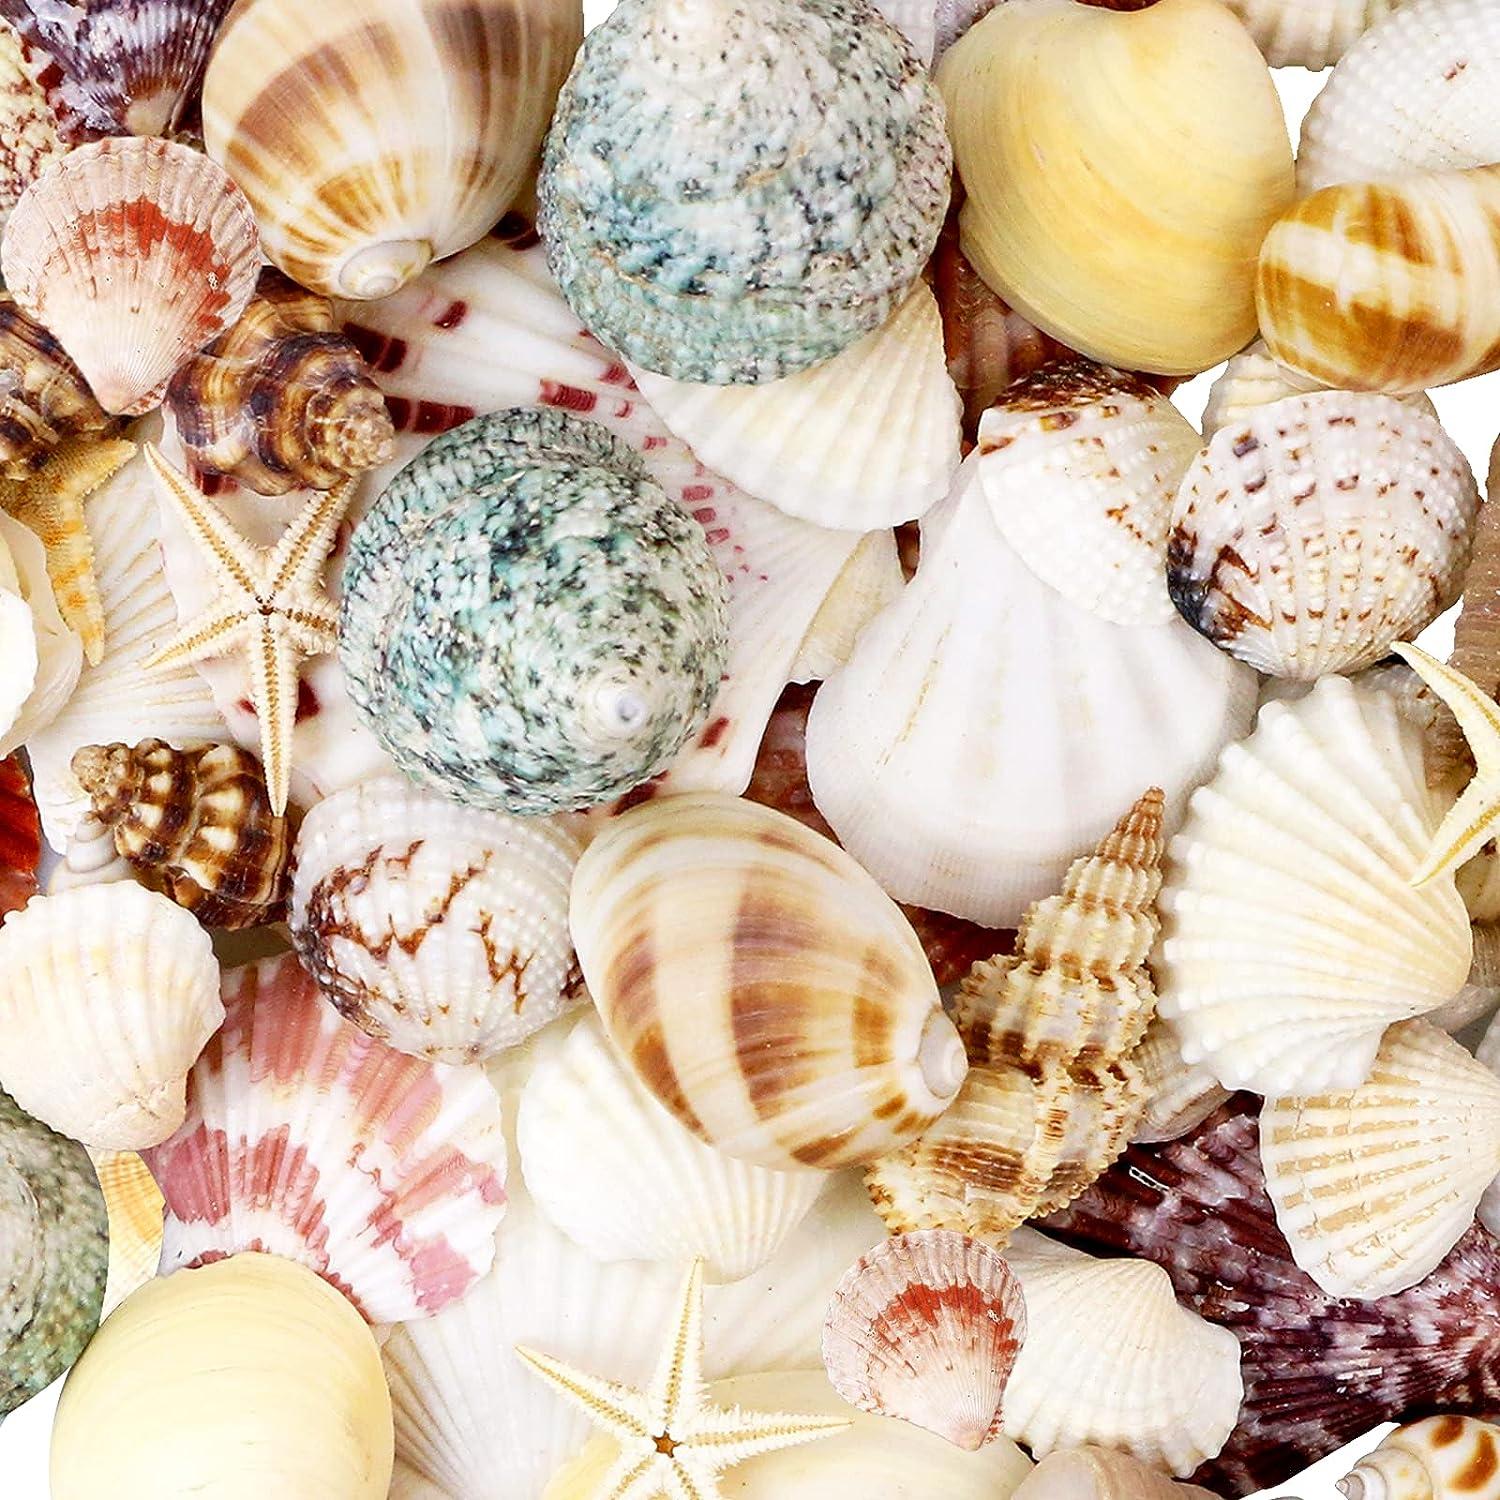 WEOXPR Mixed Sea Shells, 100+ Pcs Beach Seashells Starfish, Various Sizes  Ocean Seashells for Fish Tank Vase Fillers, Beach Theme Party Wedding Decor,  Candle Making, DIY Crafts, Home Decorations